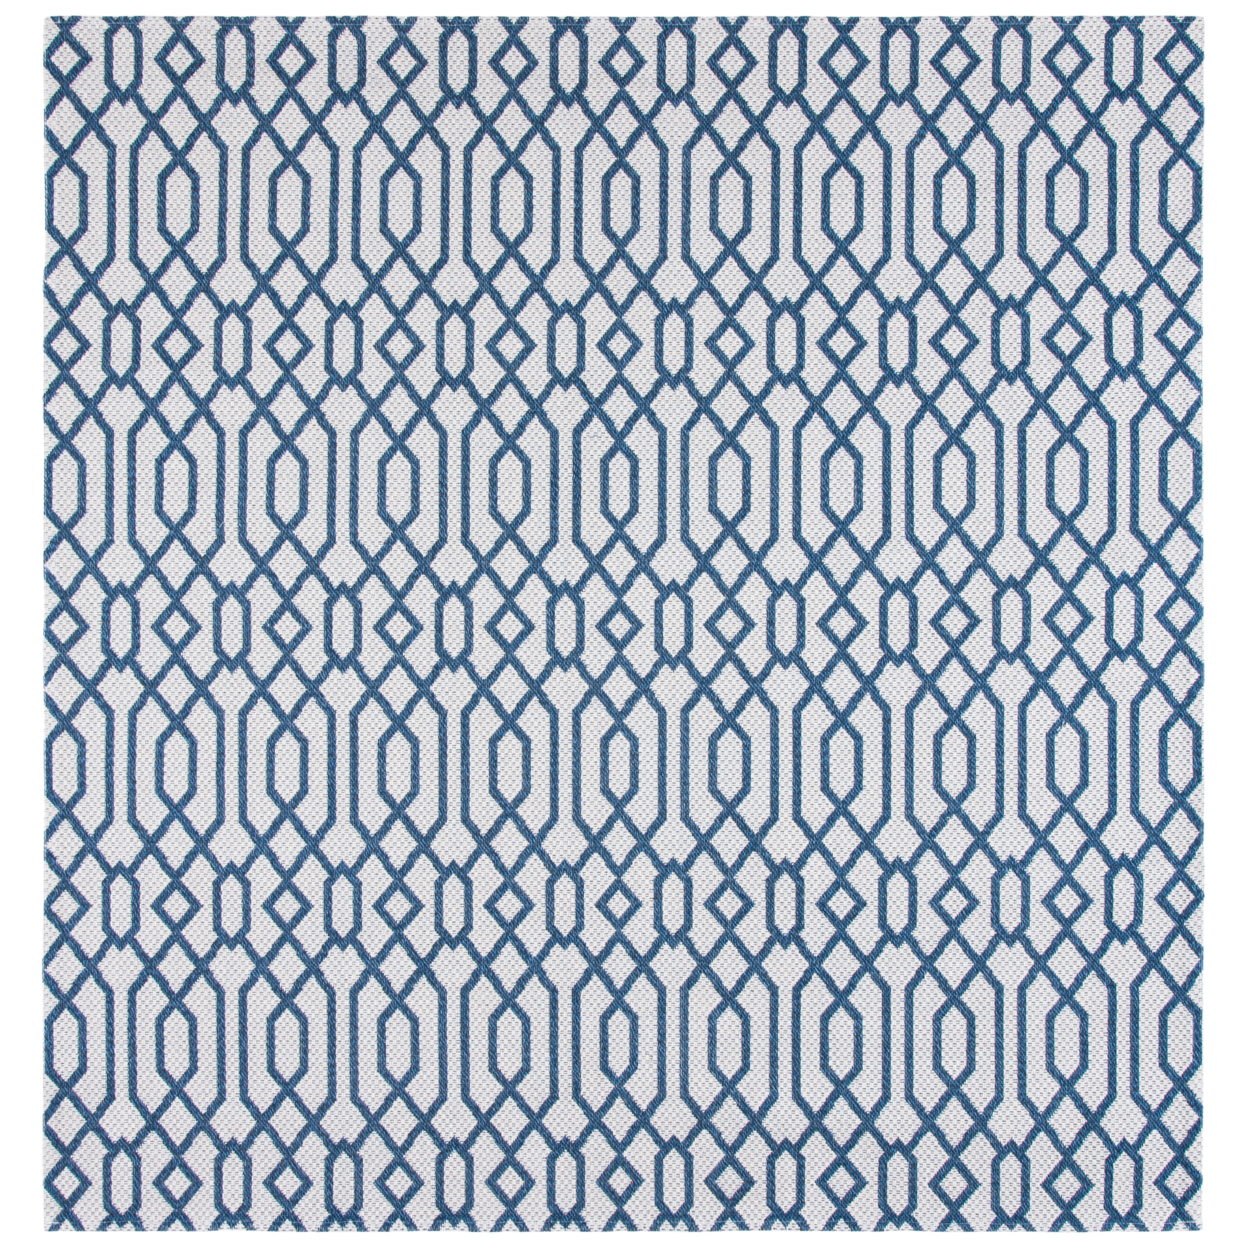 SAFAVIEH Augustine Collection AGT421M Navy/Light Grey Rug - 6' 4 Square